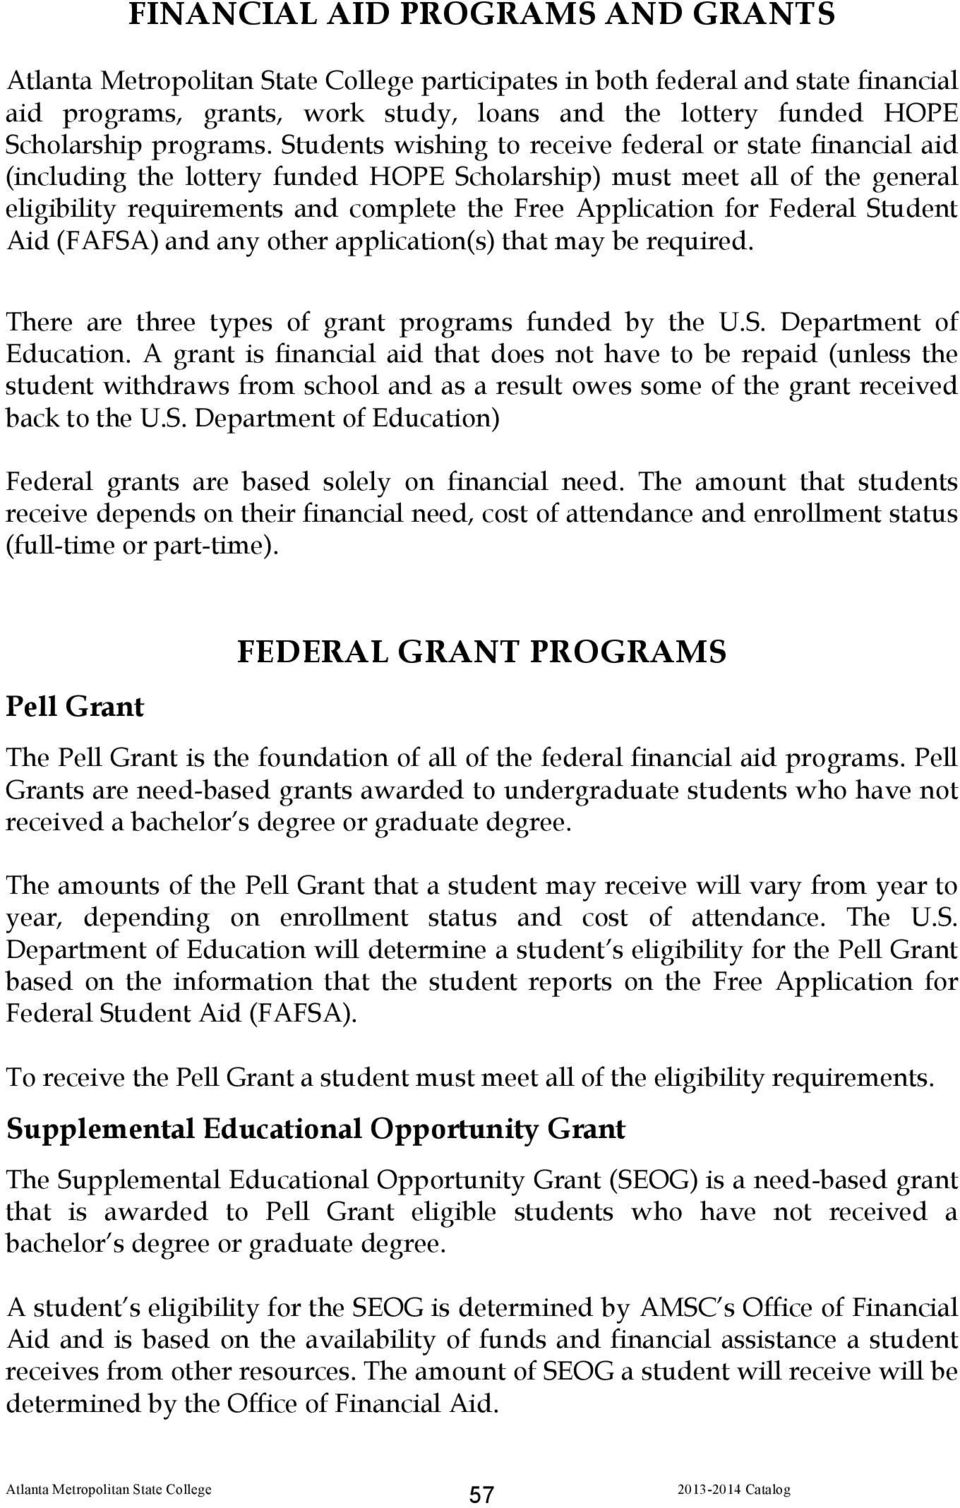 Federal Student Aid (FAFSA) and any other application(s) that may be required. There are three types of grant programs funded by the U.S. Department of Education.